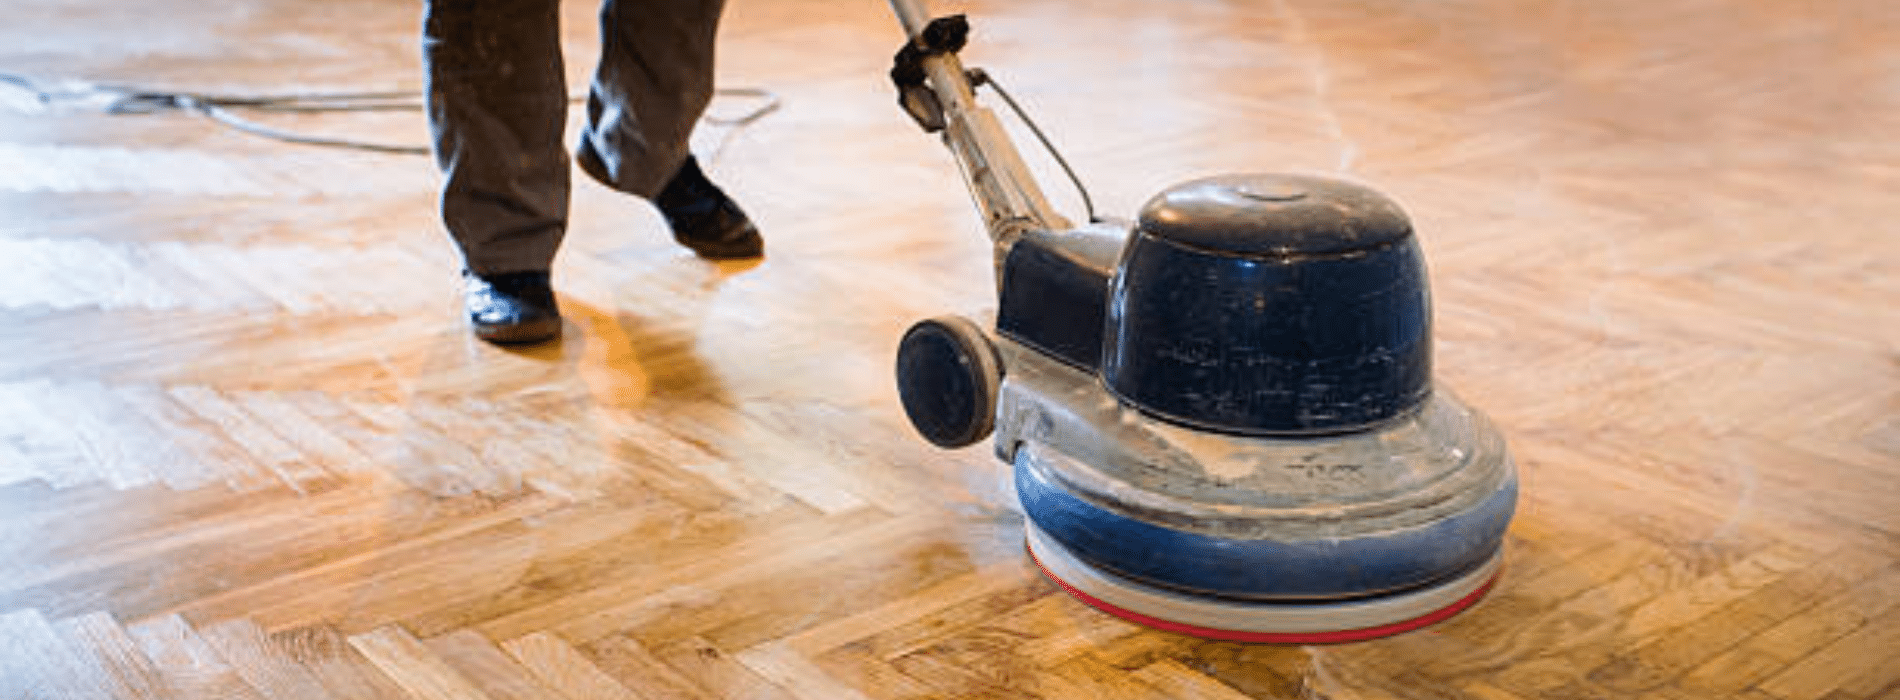 Professional herringbone floor sanding by Mr Sander® using Bona belt sander (Effect 2200, Voltage 220, Frequency 50Hz) and HEPA-filtered dust extraction. Experience the clean and efficient result on your 250x650 mm floor. 